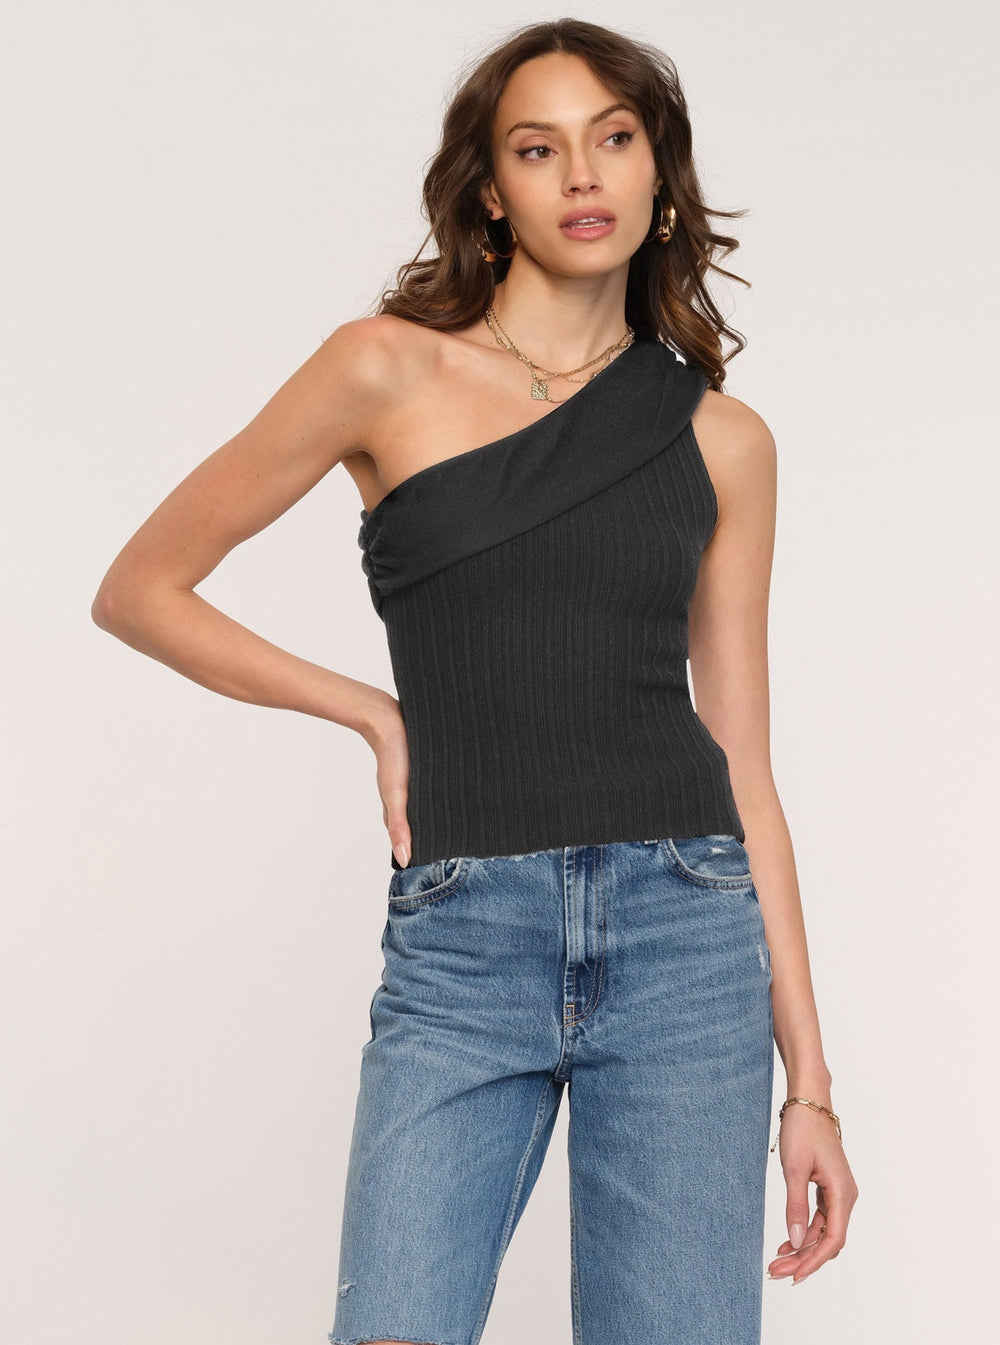 Ginger tank by Heartloom in black or bisque at Tru Bue Boutique